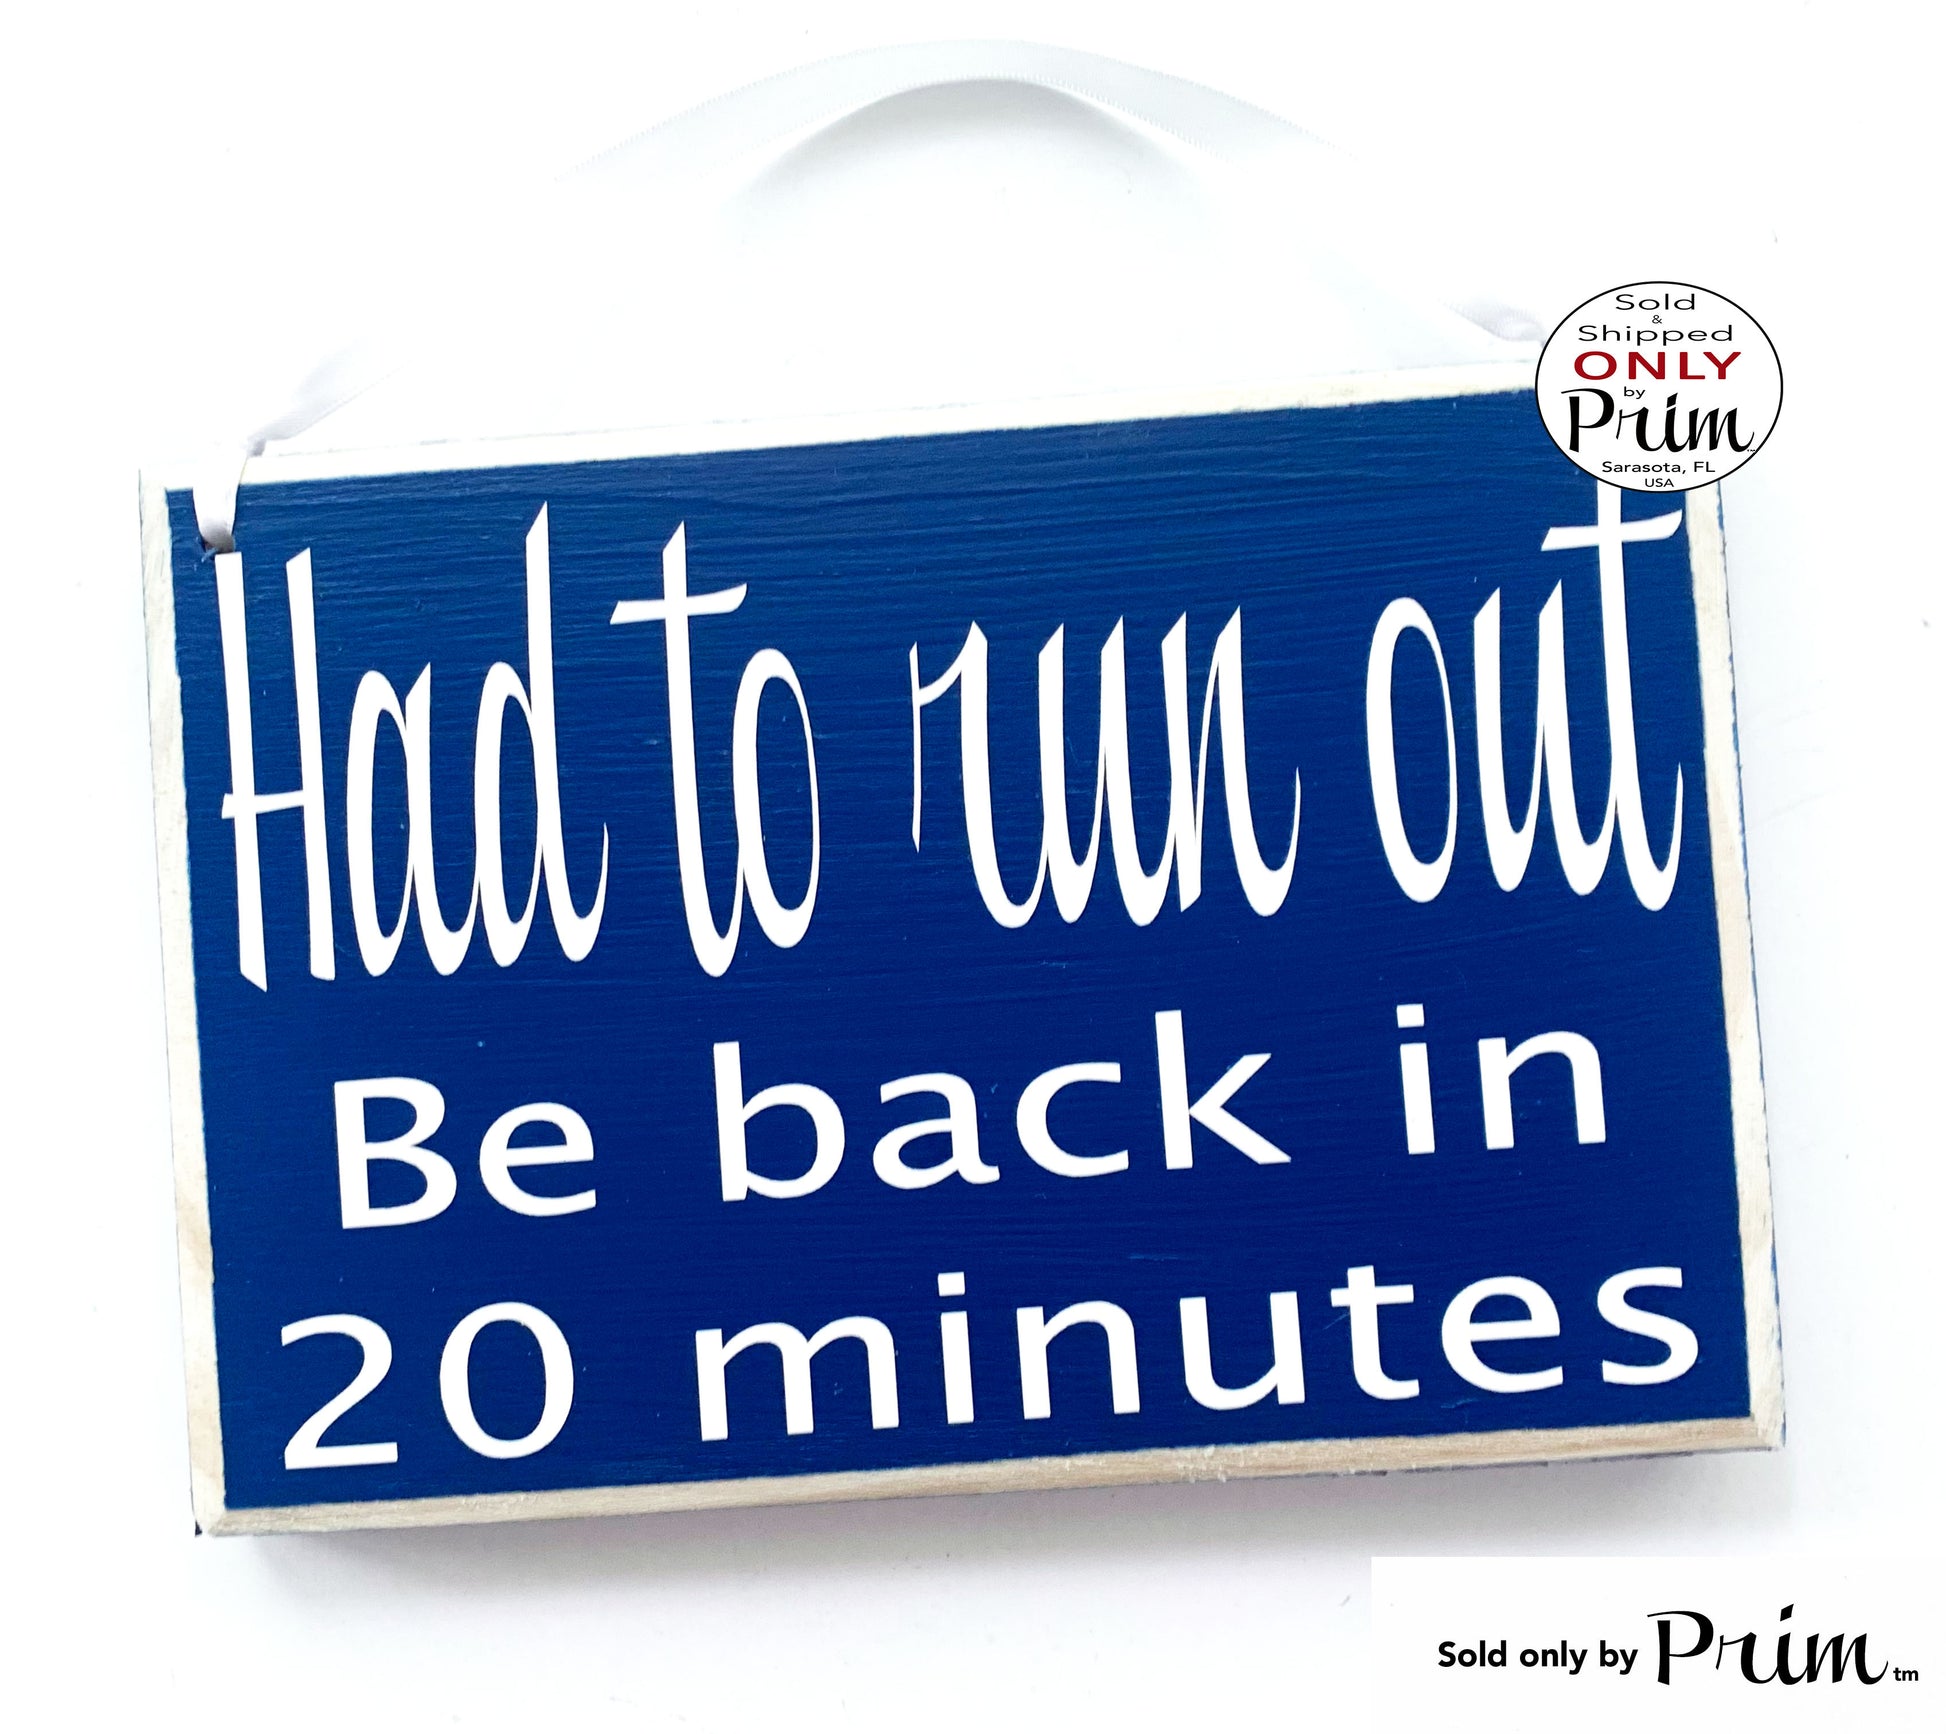 8x6 Had to run out Be back in 20 minutes Custom Wood Sign | Be Right Back Running Errands | Closed Come Back Soon Door Hanger Plaque Designs by Prim